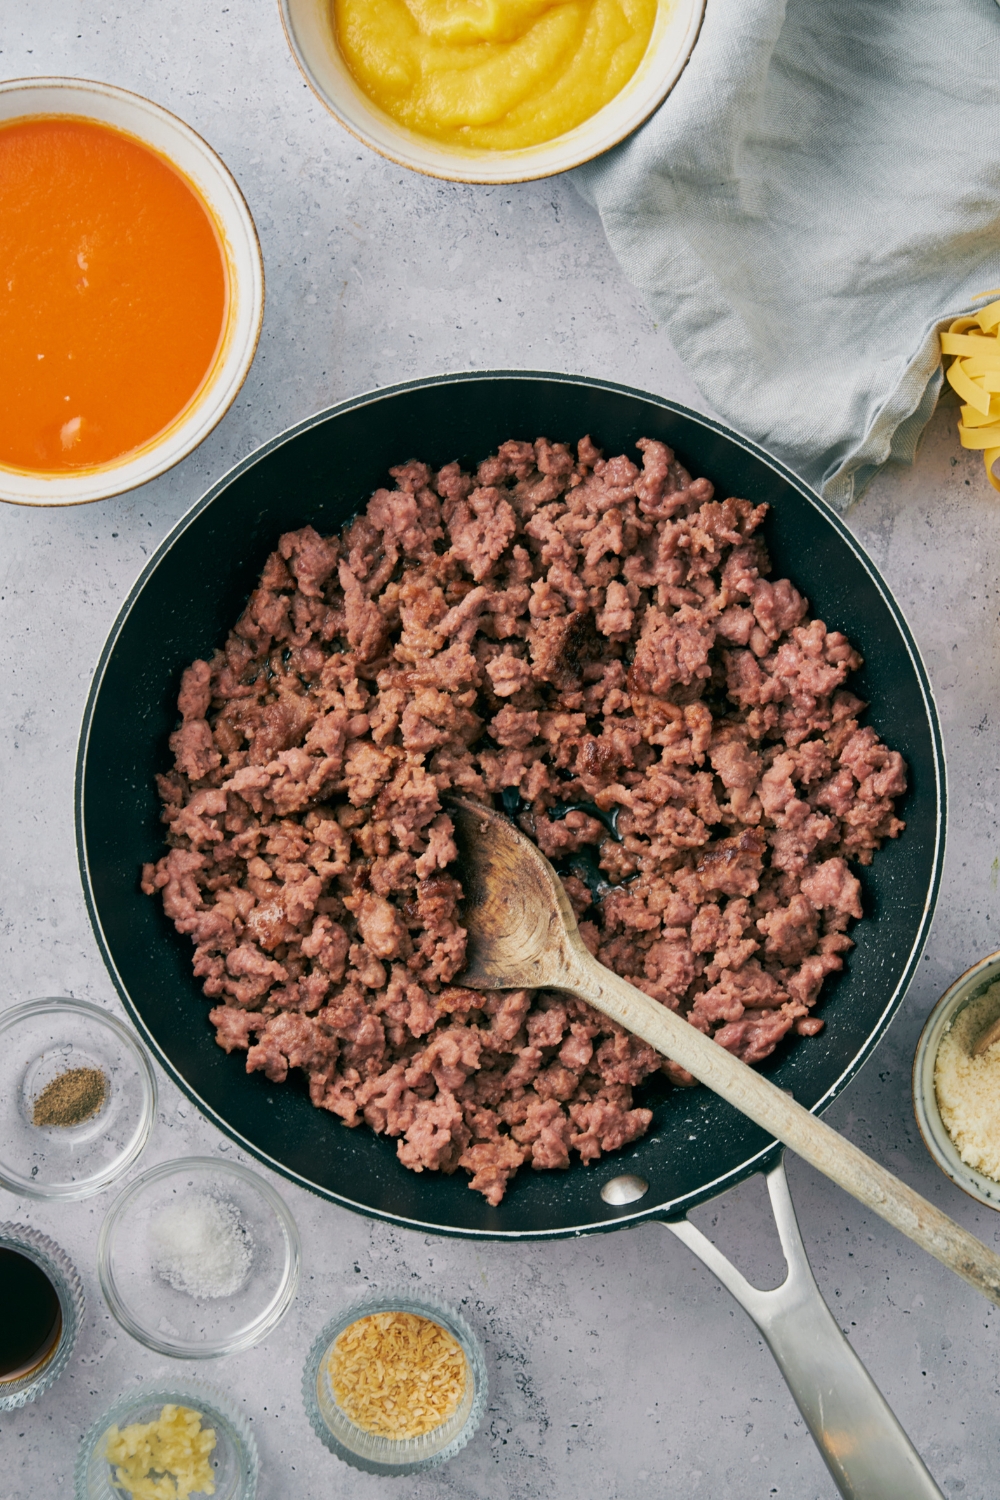 A skillet filled with cooked ground beef broken up using a wooden spoon.